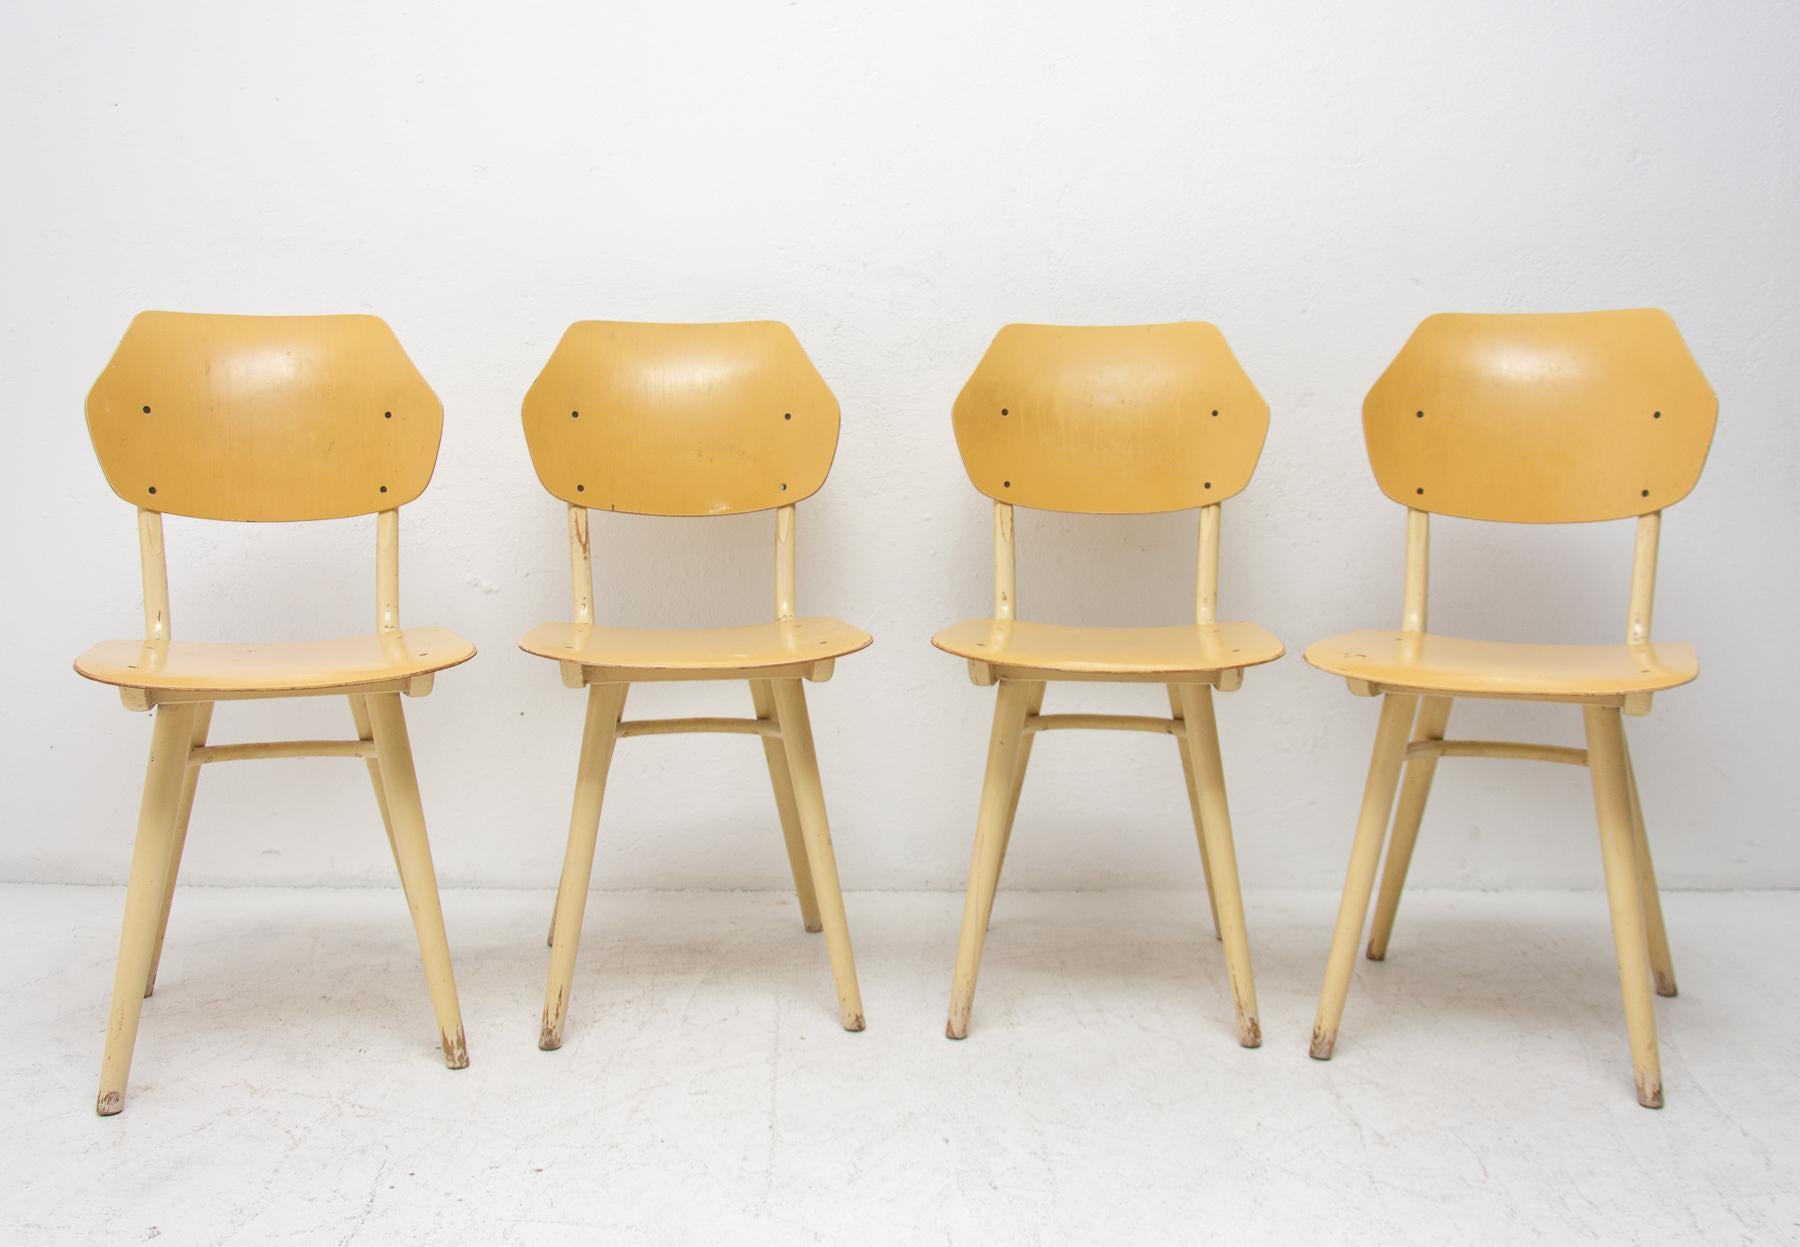 Set of four patinated dining chairs from the 1960s. It was produced by TON, Czechoslovakia. The TON company was established as successor to the famous Thonet after World War II in Czechoslovakia and continued the production of bentwood furniture. It